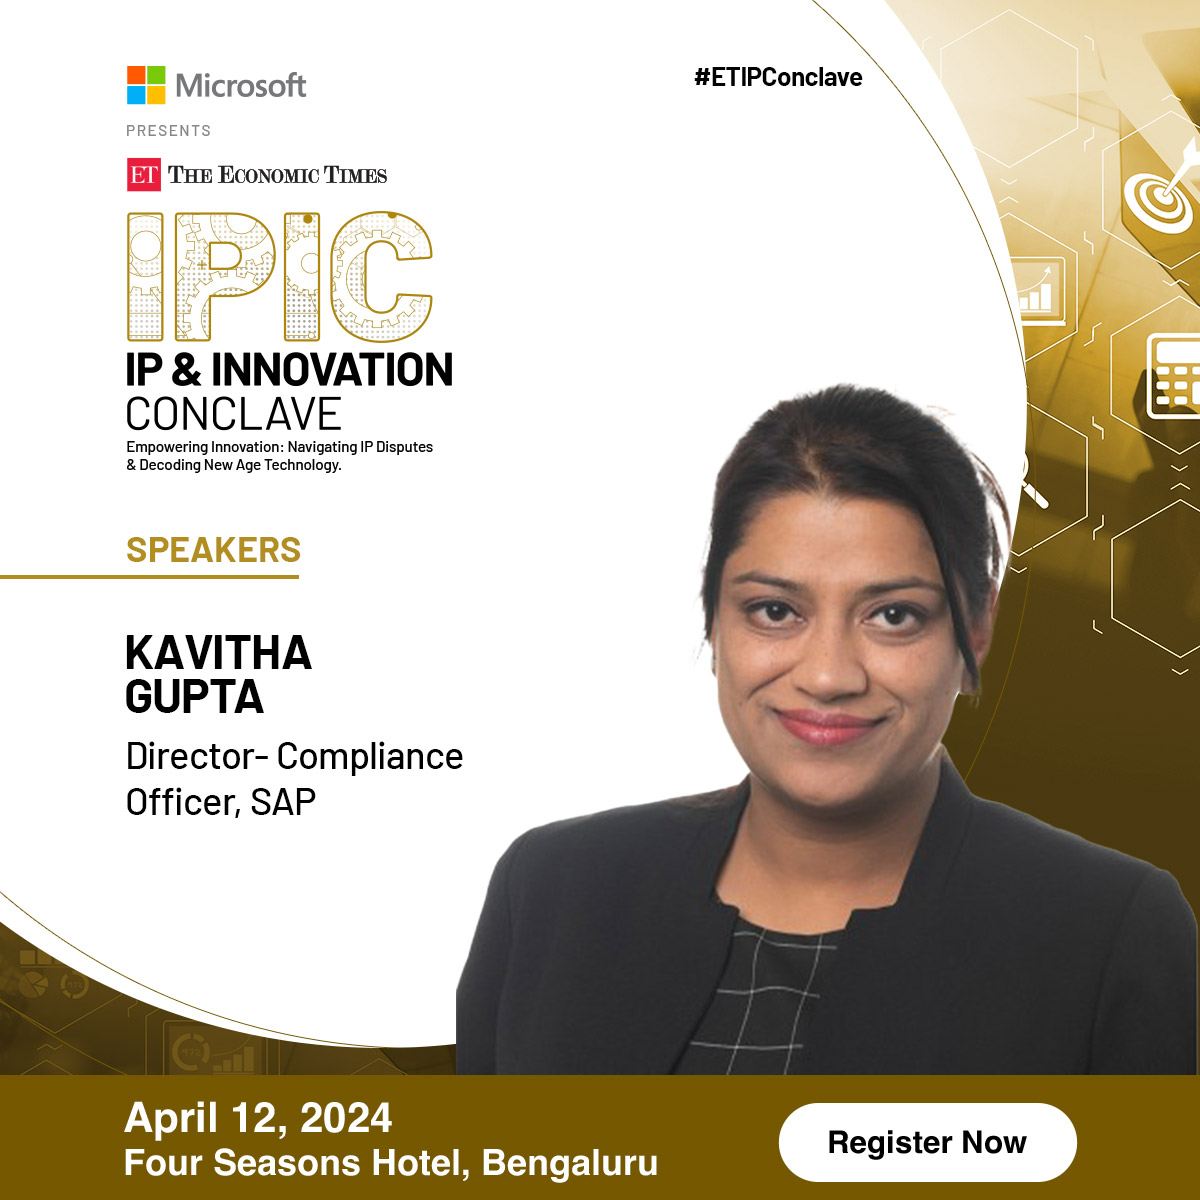 Thrilled to announce Kavitha Gupta, Director- Compliance Officer, @SAPIndia as our distinguished Speaker at #ETIPConclave. 

Register Now: bit.ly/4bCapv0

#ETLegalWorld #IPInsights #TrademarkRevolution #IntellectualProperty #LegalInnovation #TechLaw #FutureOfIP